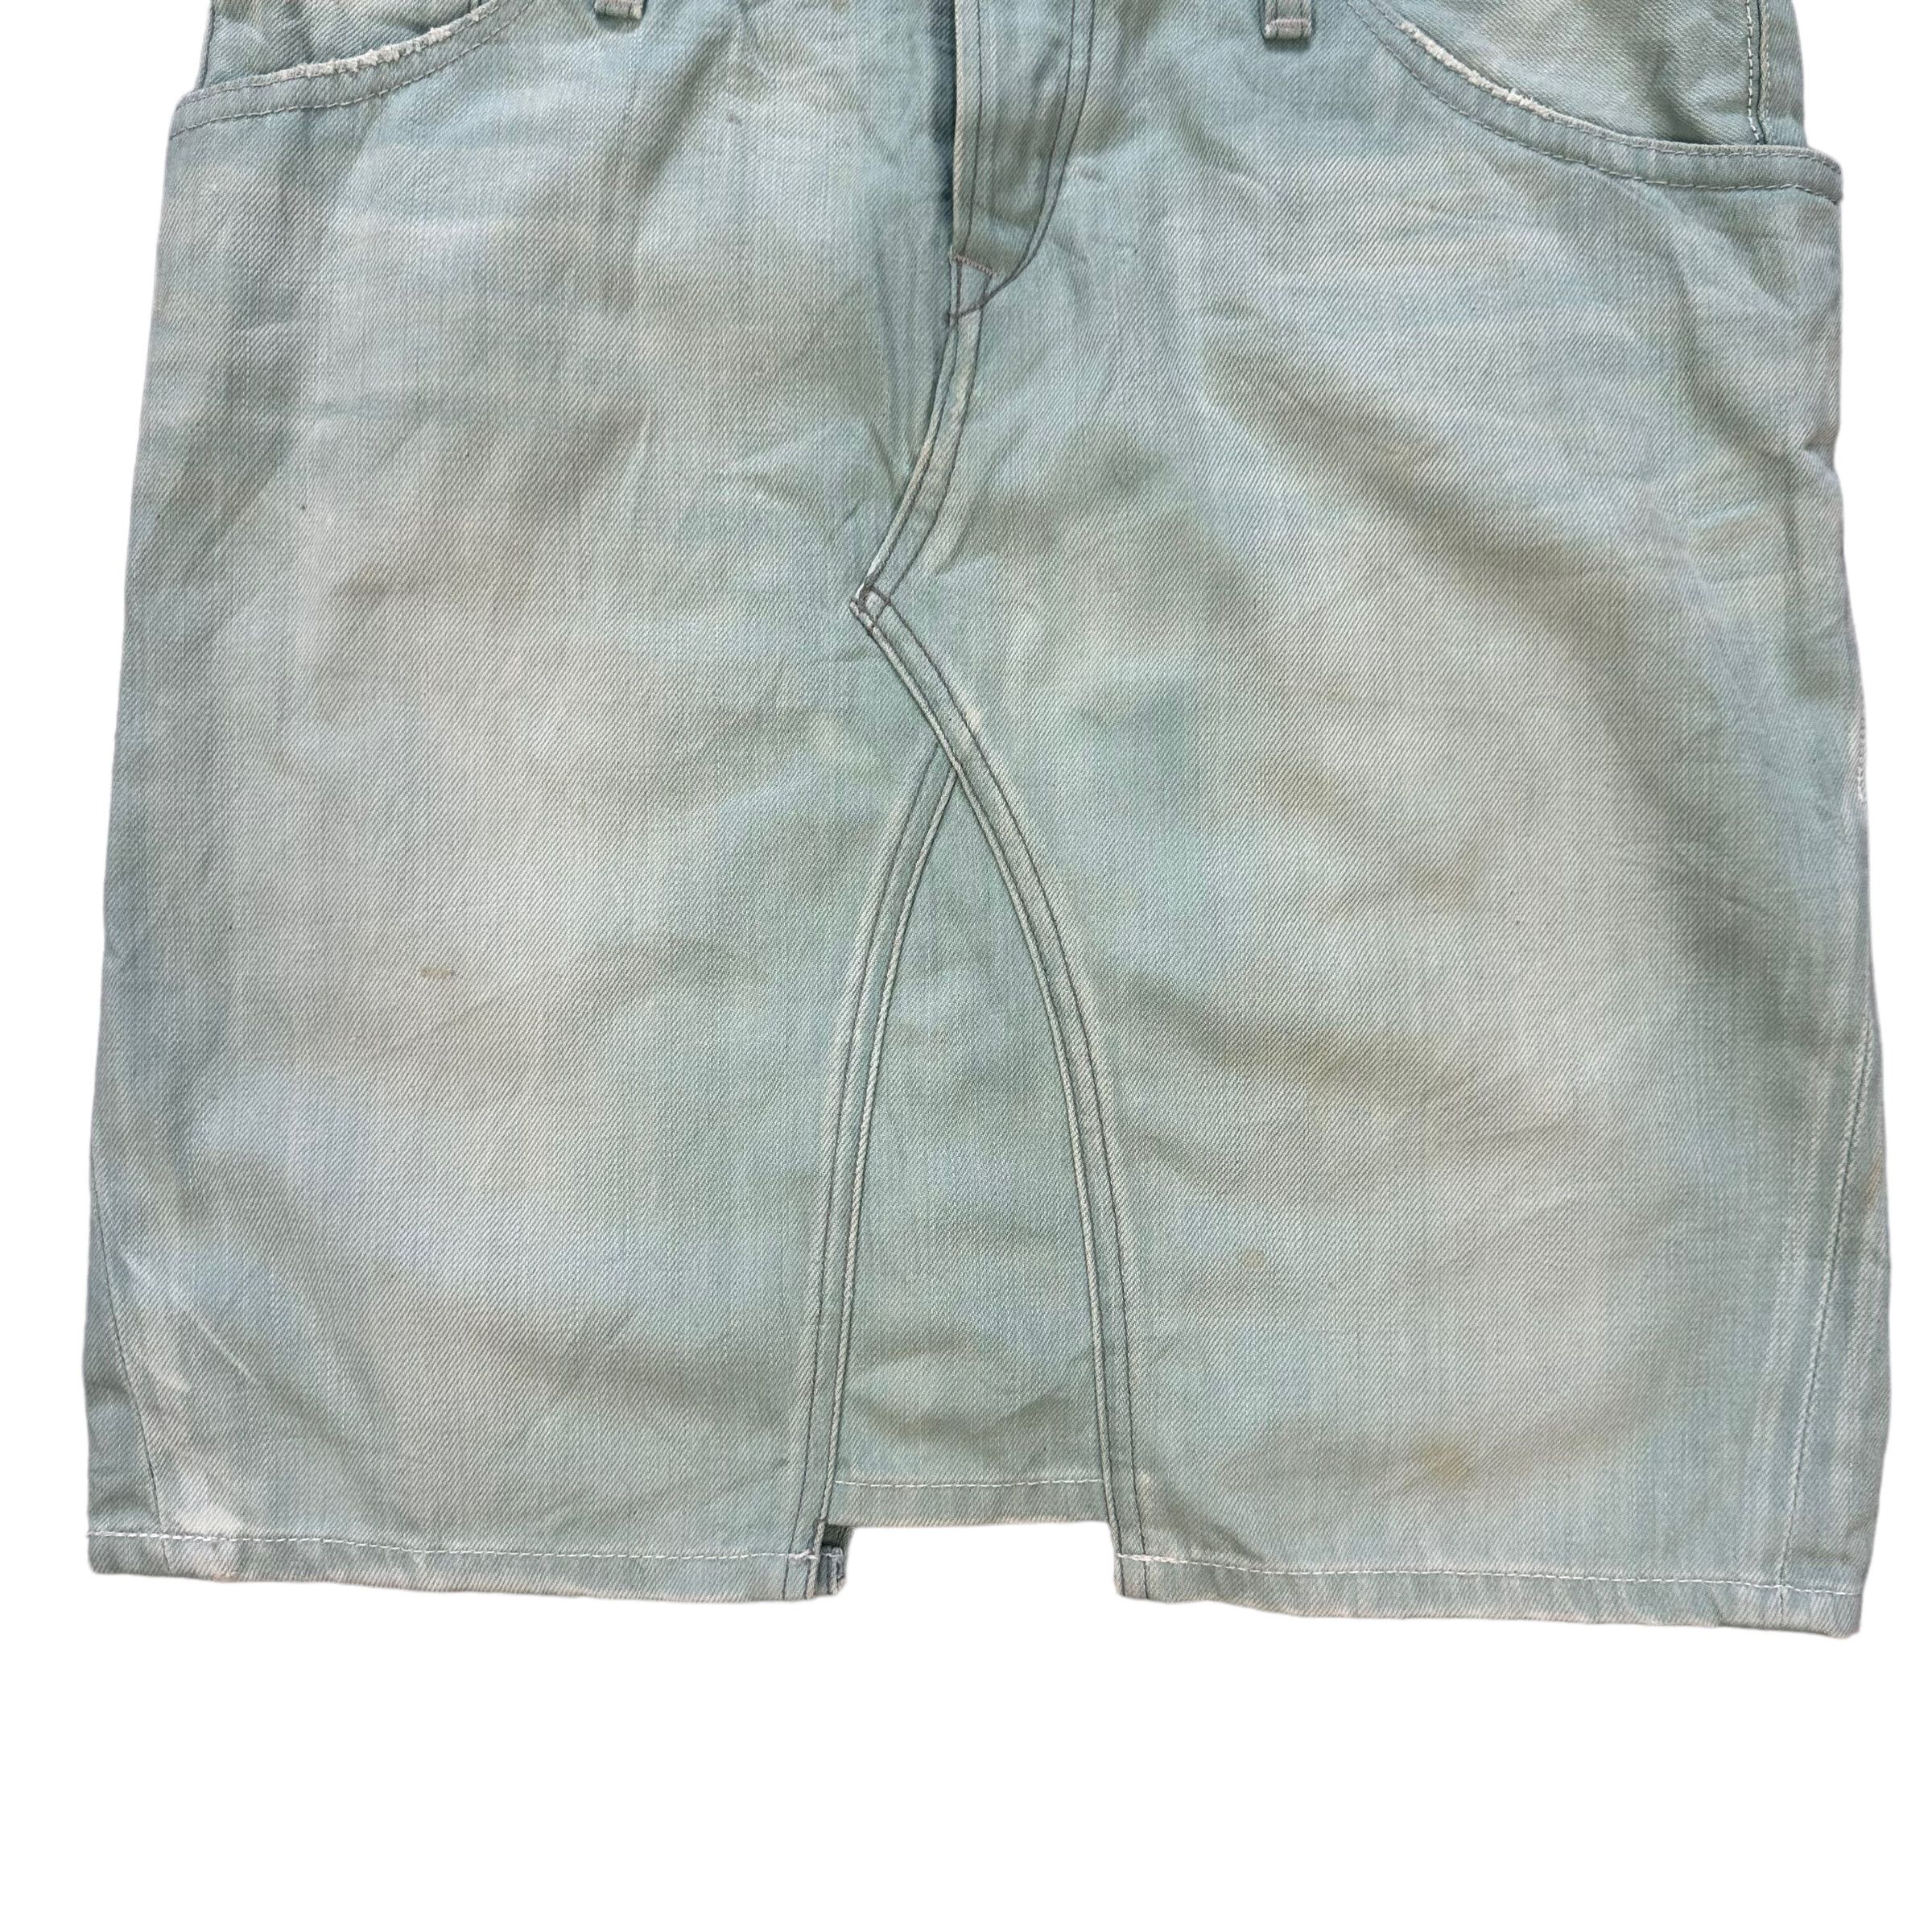 LEVIS LADY STYLE OVERALL MINI SKIRT IN GREEN DENIM #8659-019 - 4